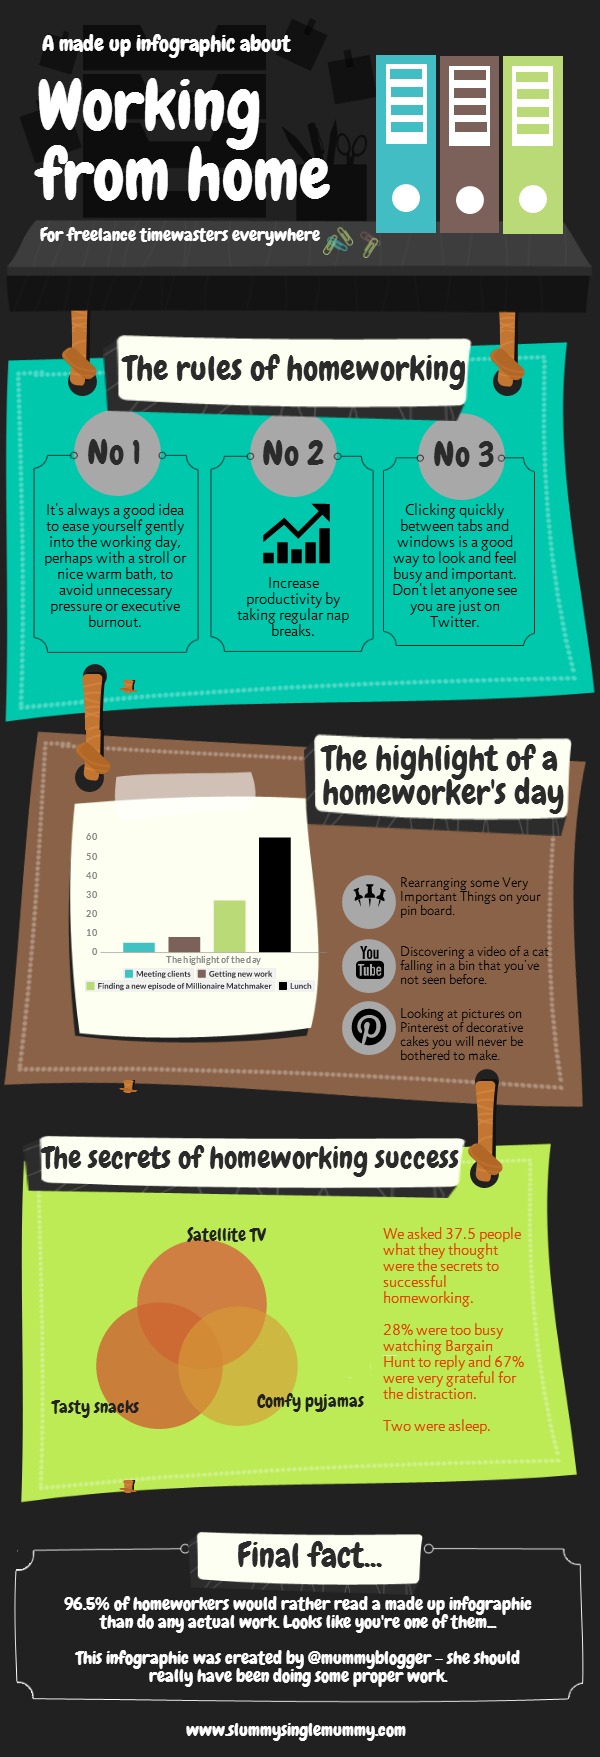 Made up infographic about working from home